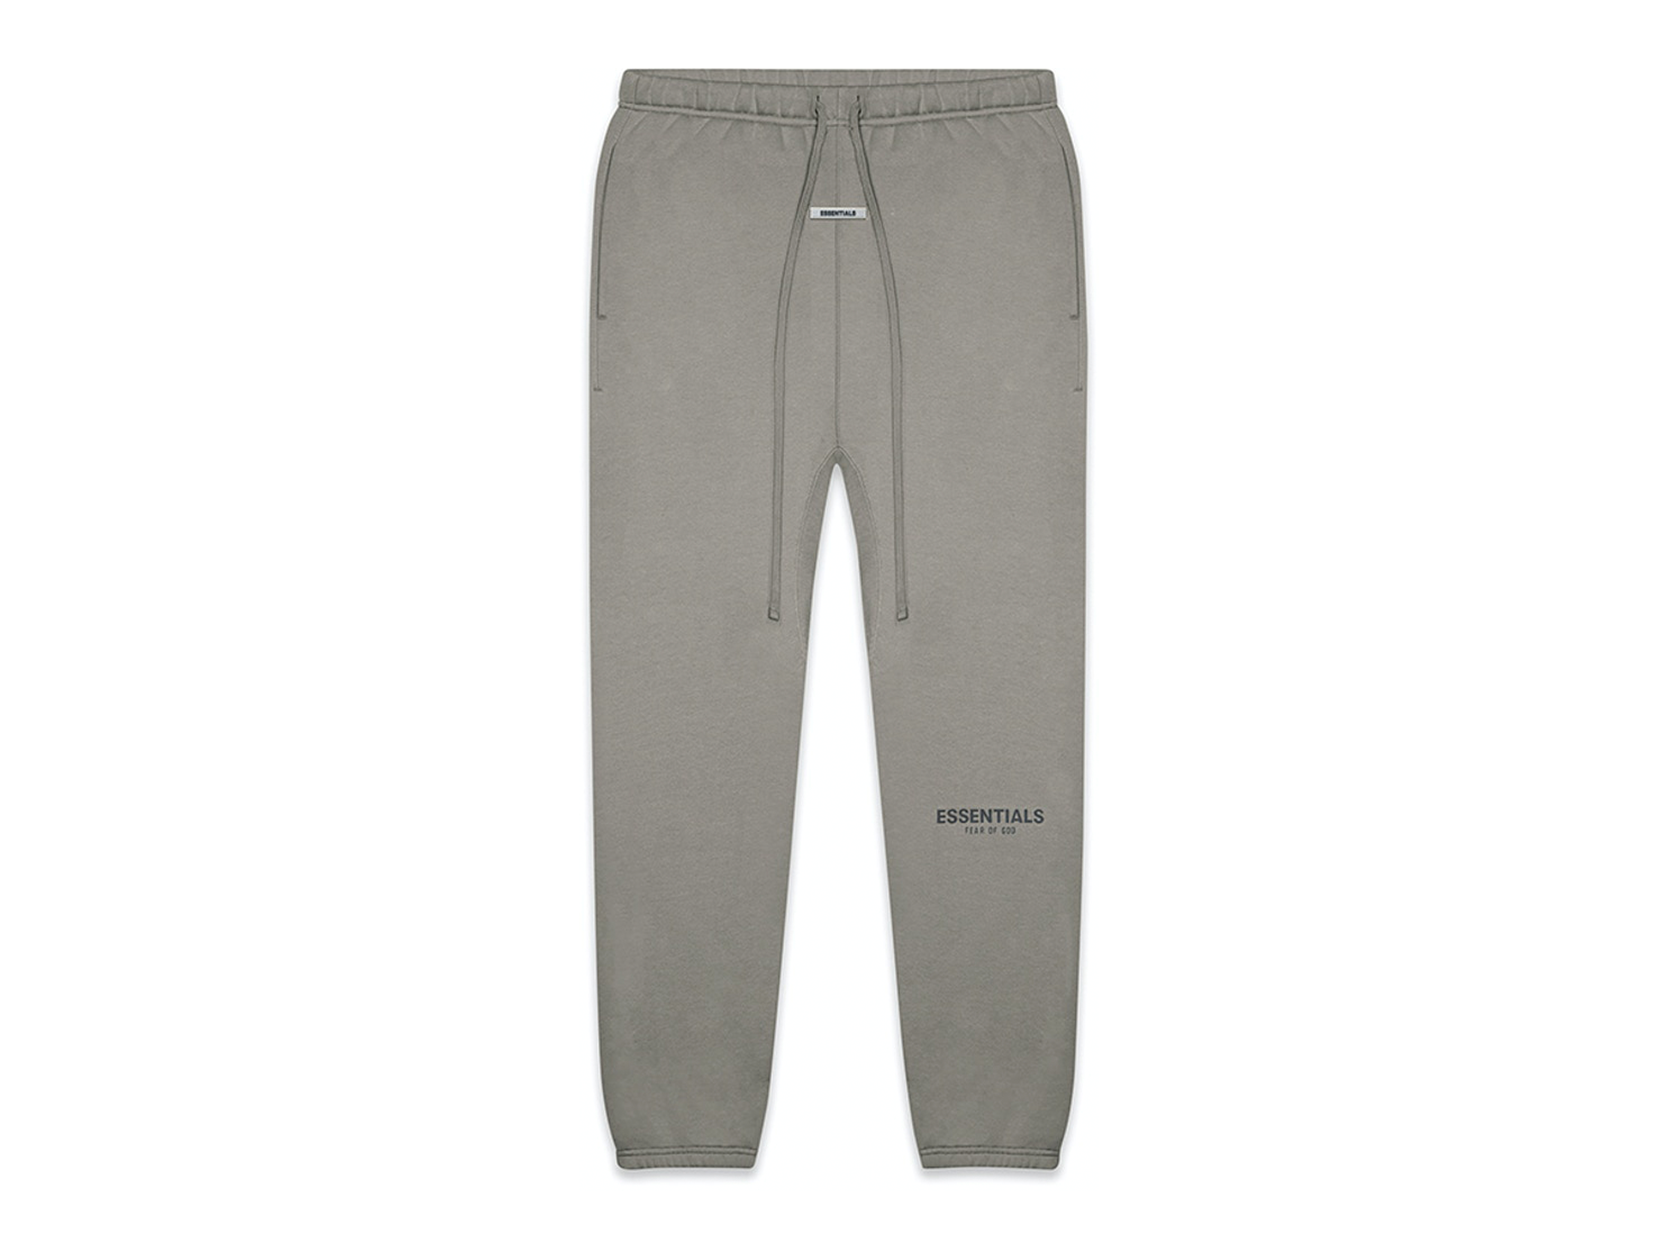 Double Boxed hoodie 249.99 FEAR OF GOD ESSENTIALS SWEATPANTS CEMENT Double Boxed